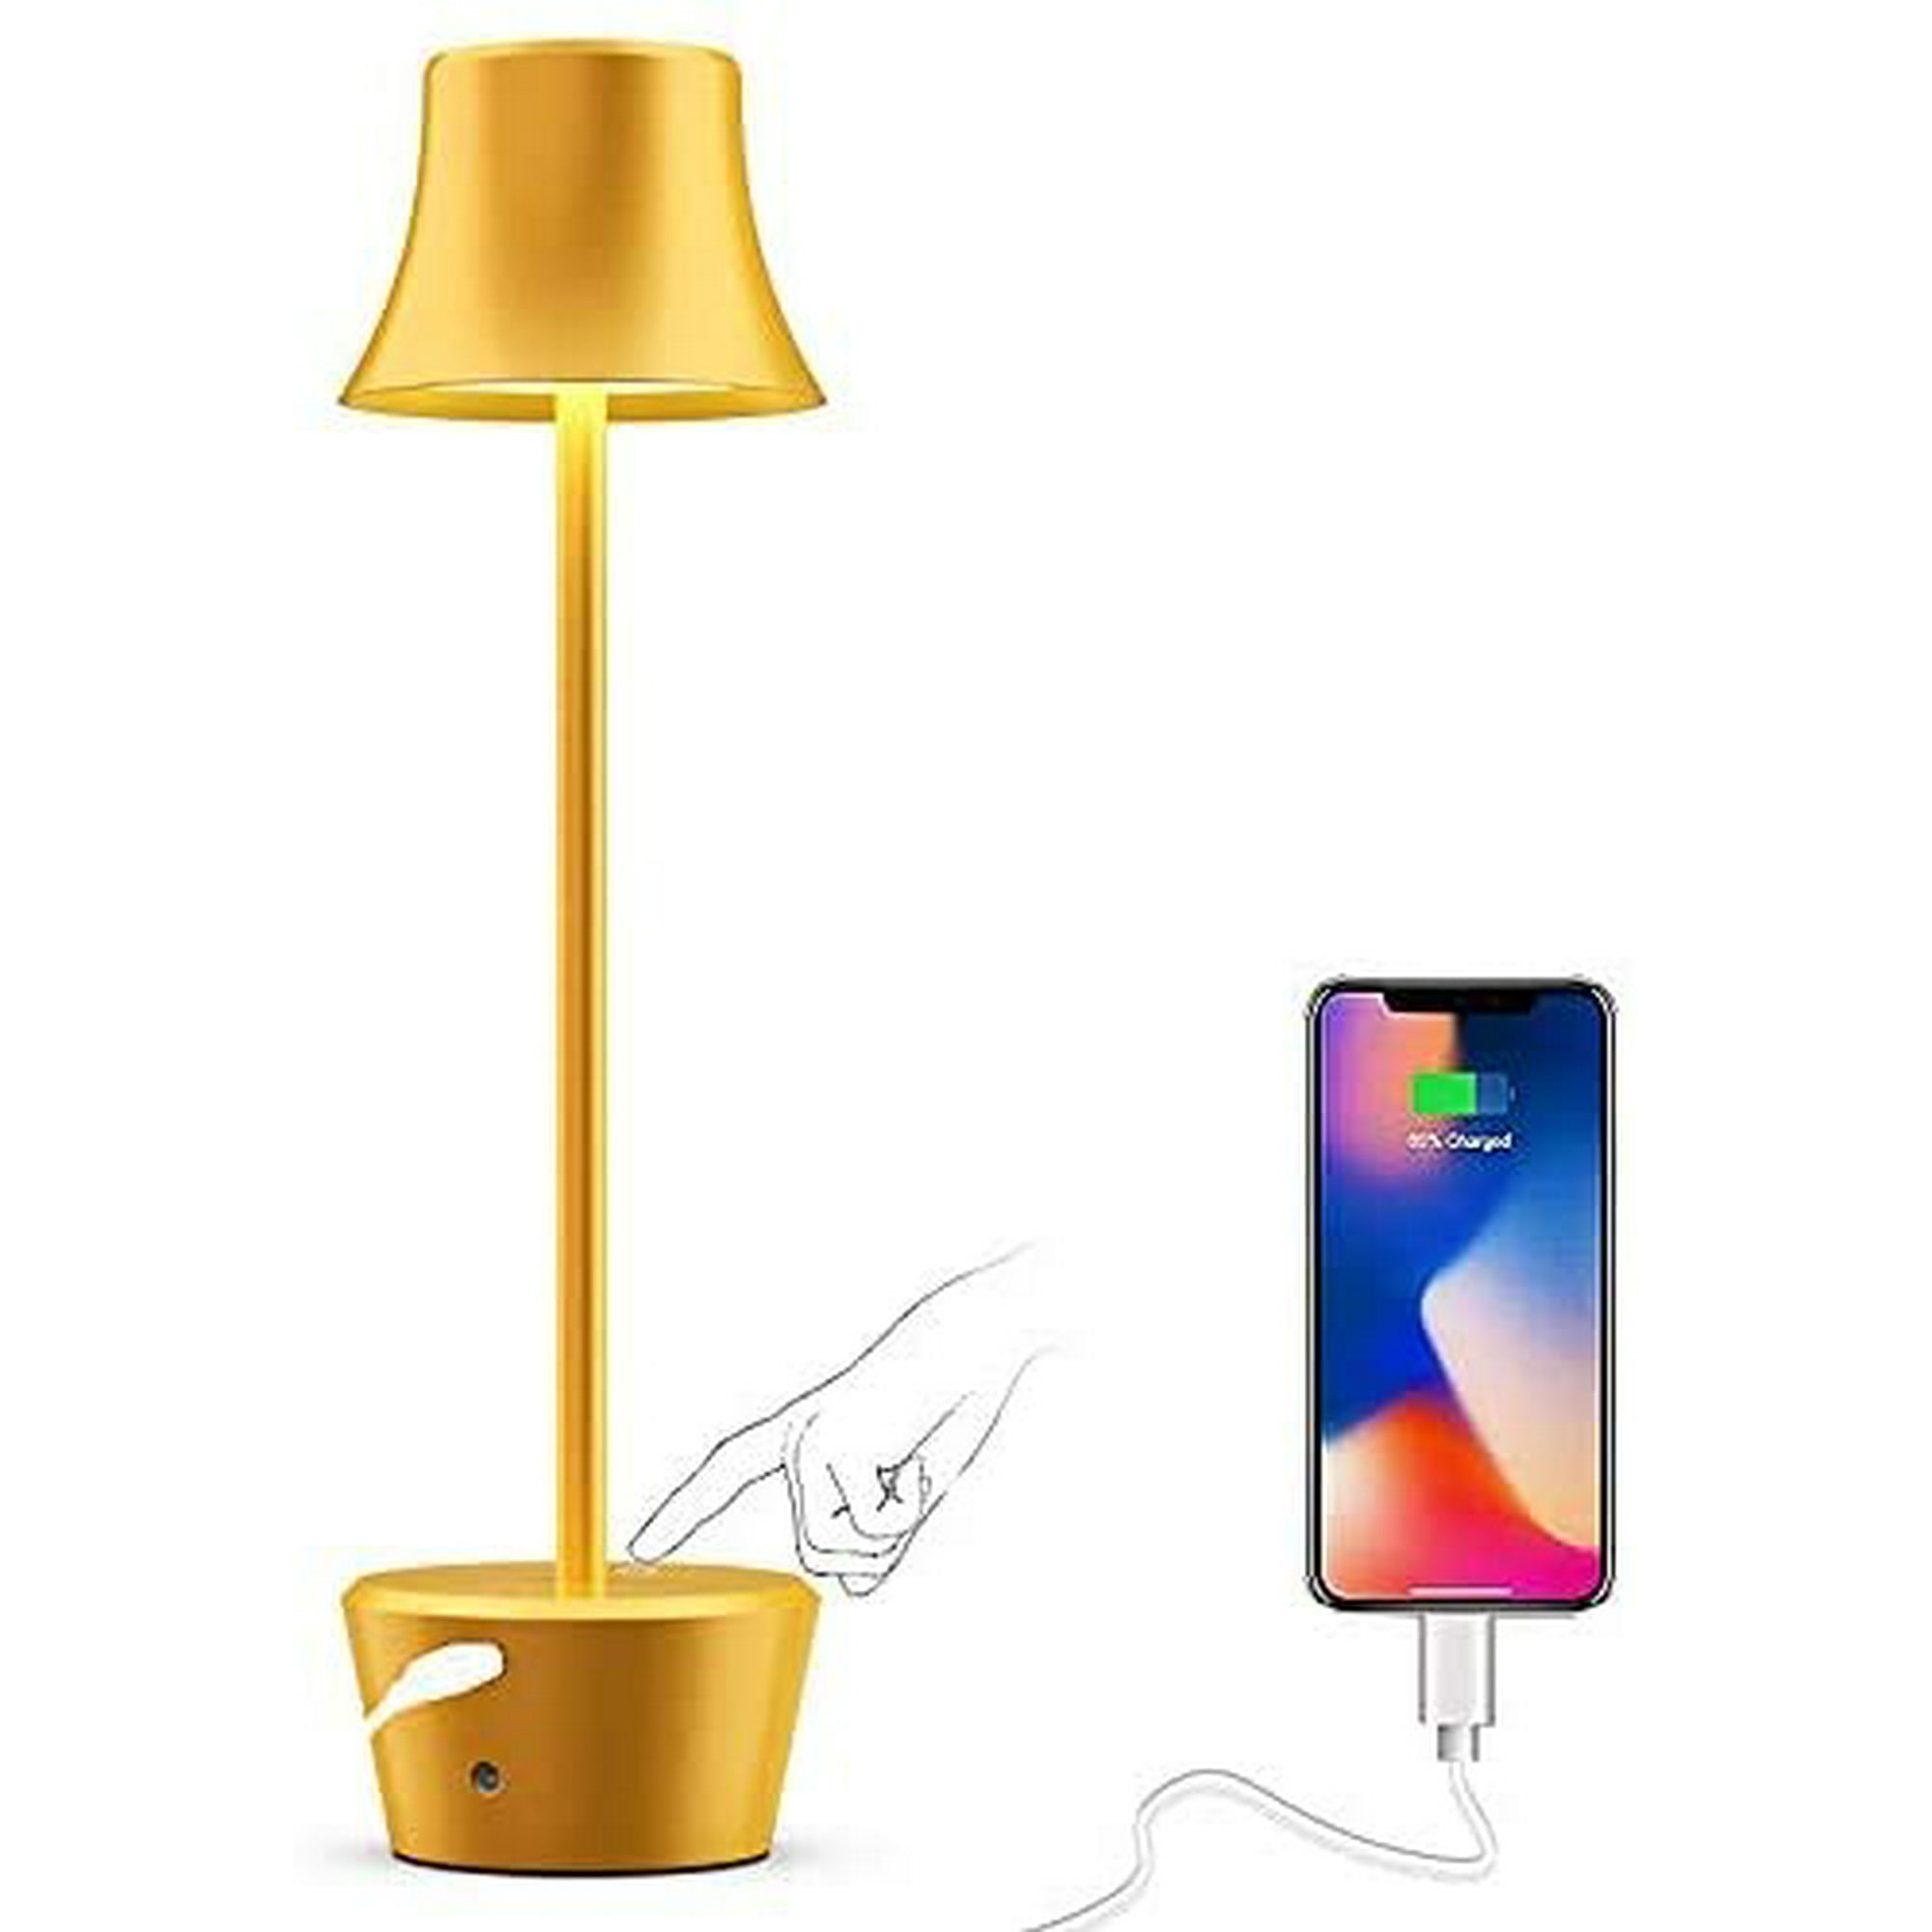 Cordless Table Lamp 6000mah Led, Rechargeable Battery Powered Table Lamps